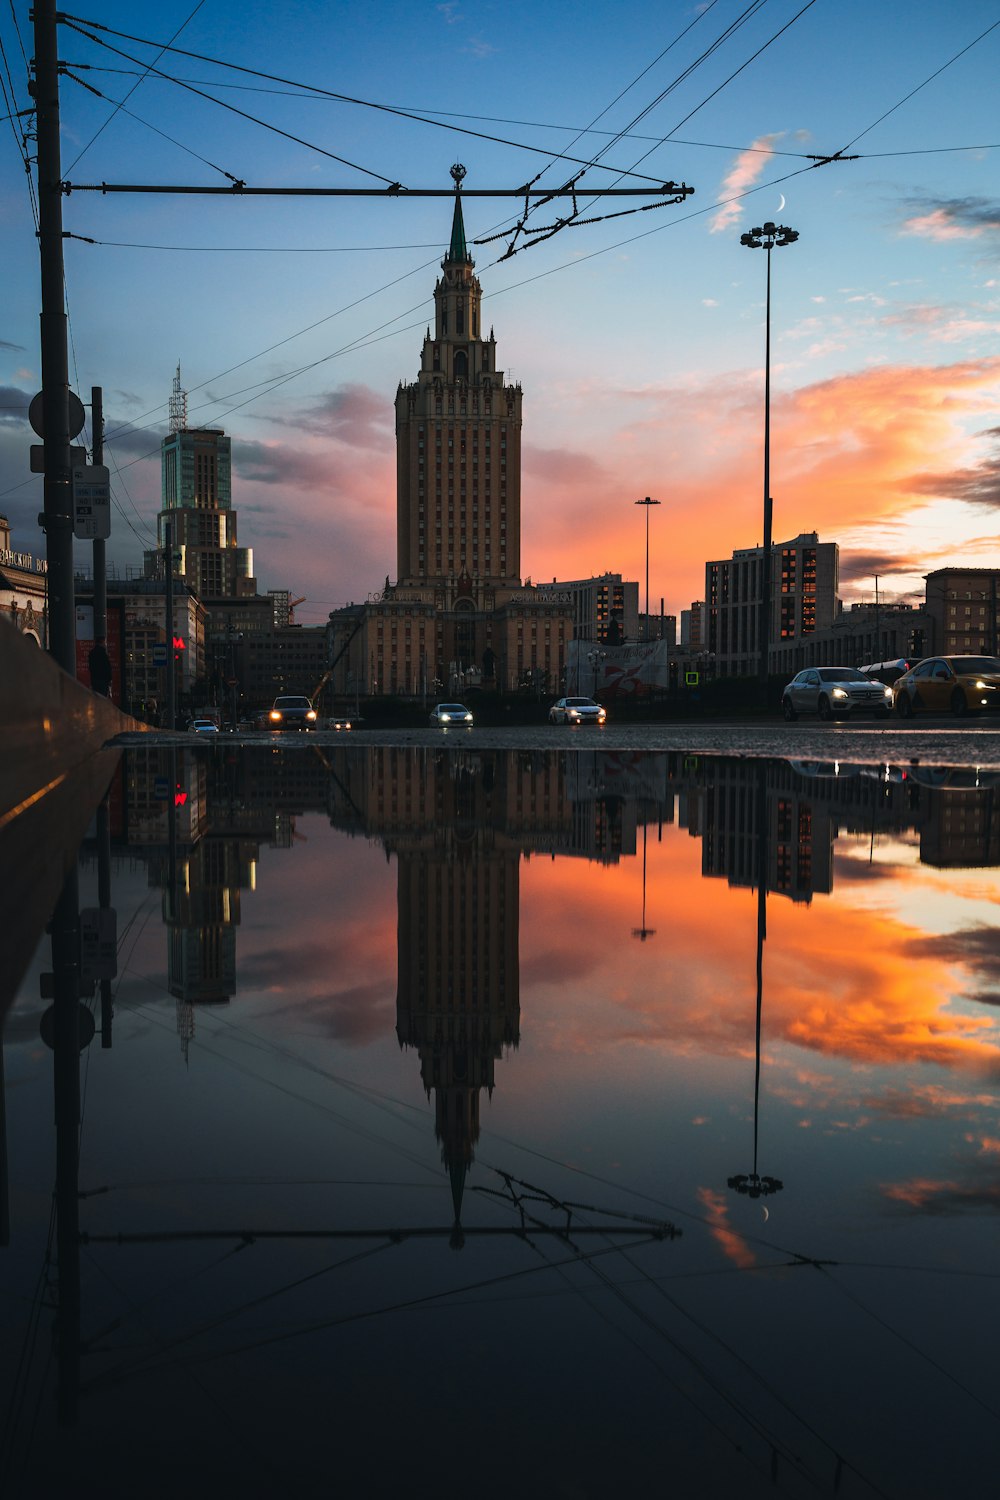 a view of a city at sunset with a reflection in the water